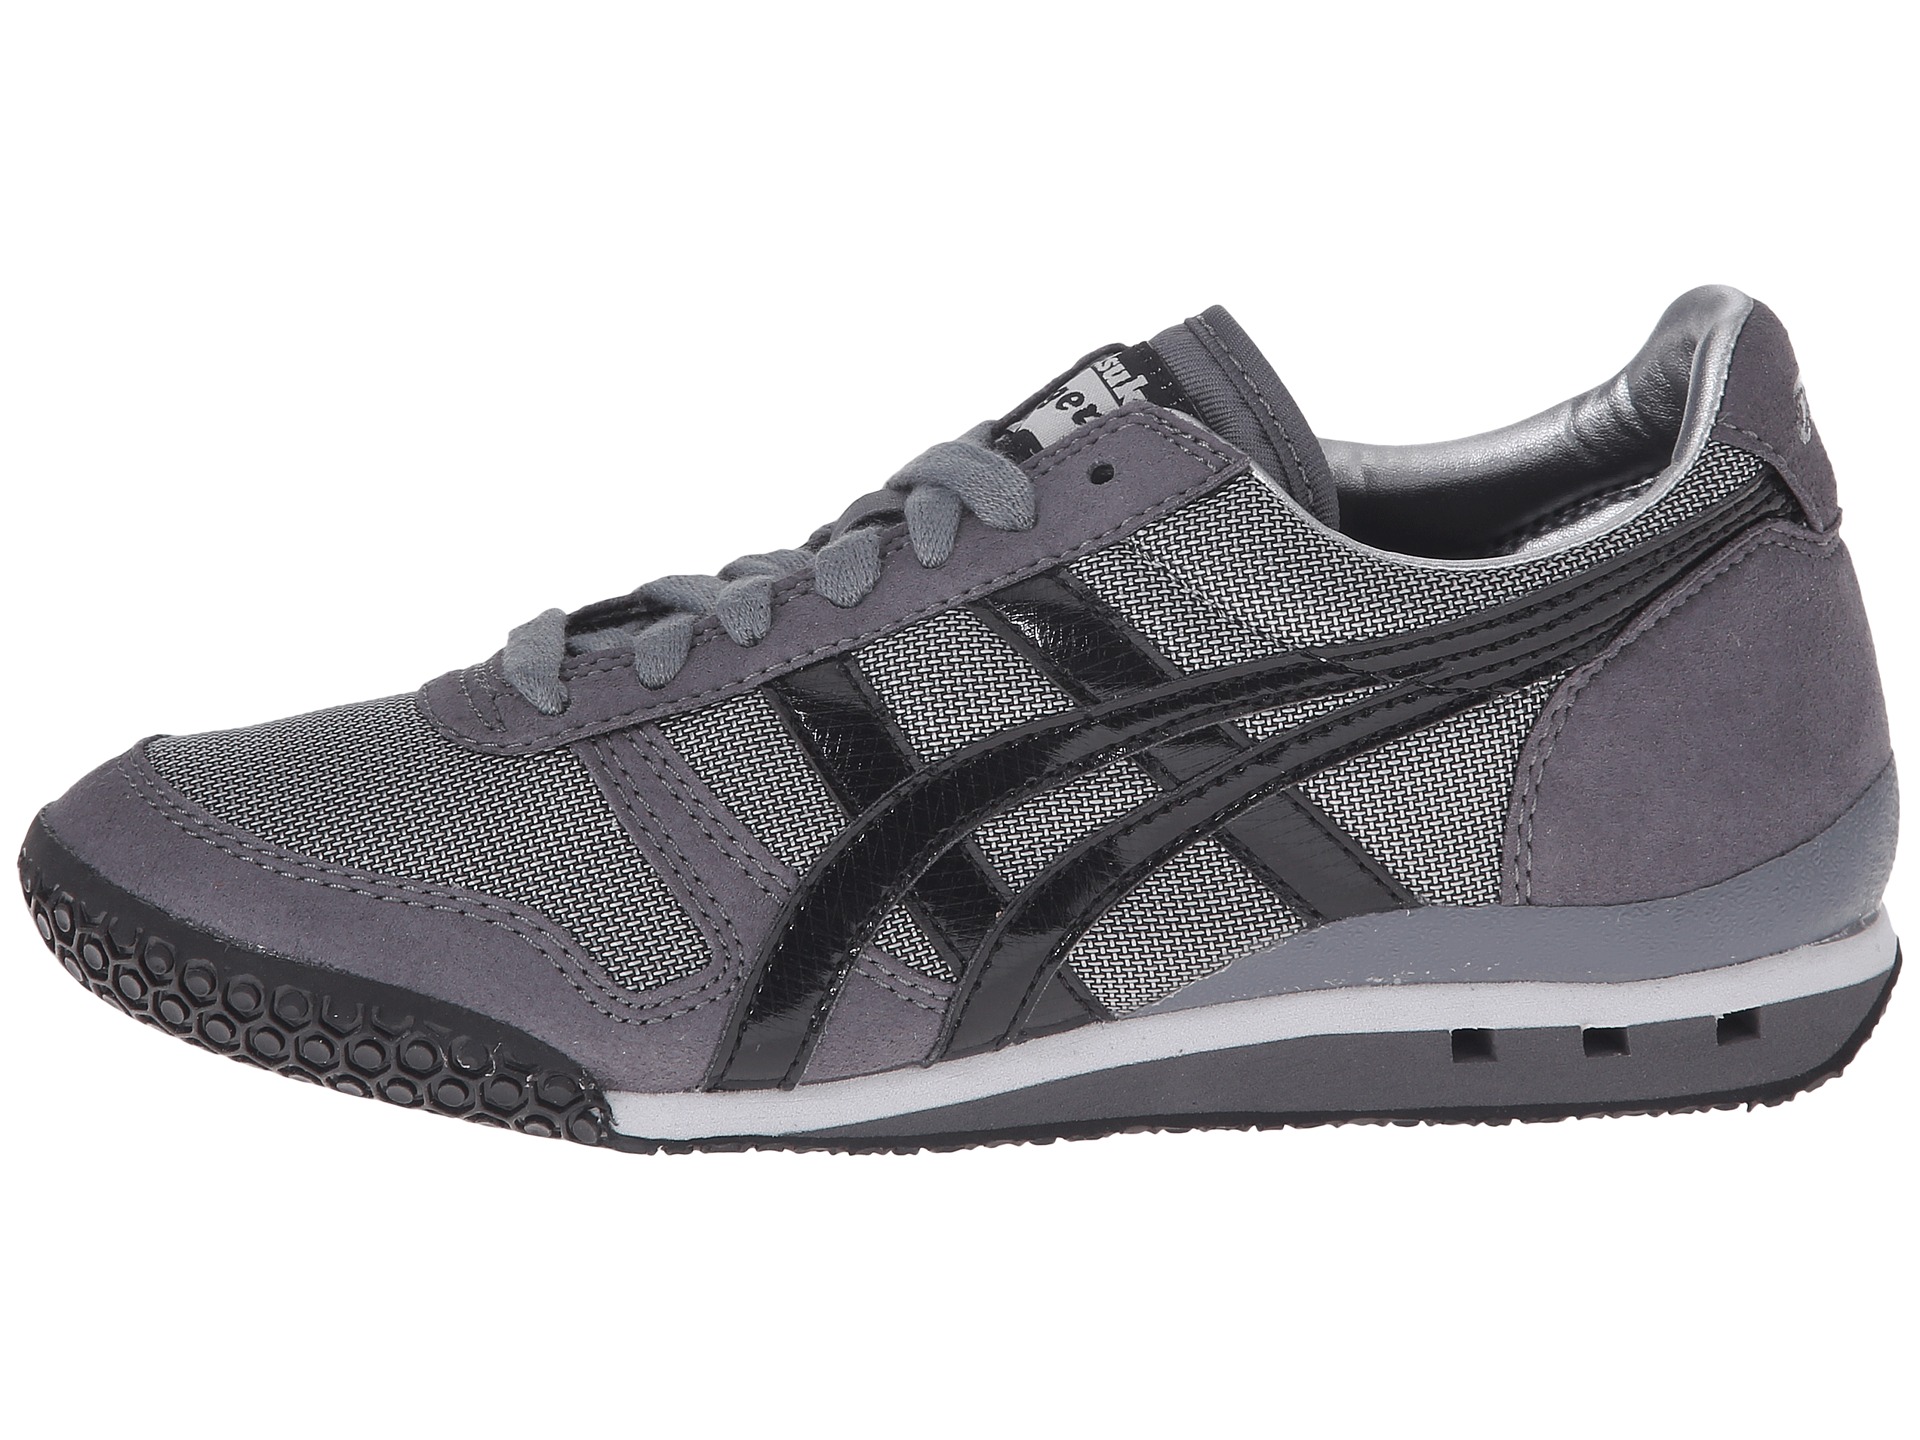 Onitsuka Tiger by Asics Ultimate 81® Silver/Black - Zappos.com Free ...